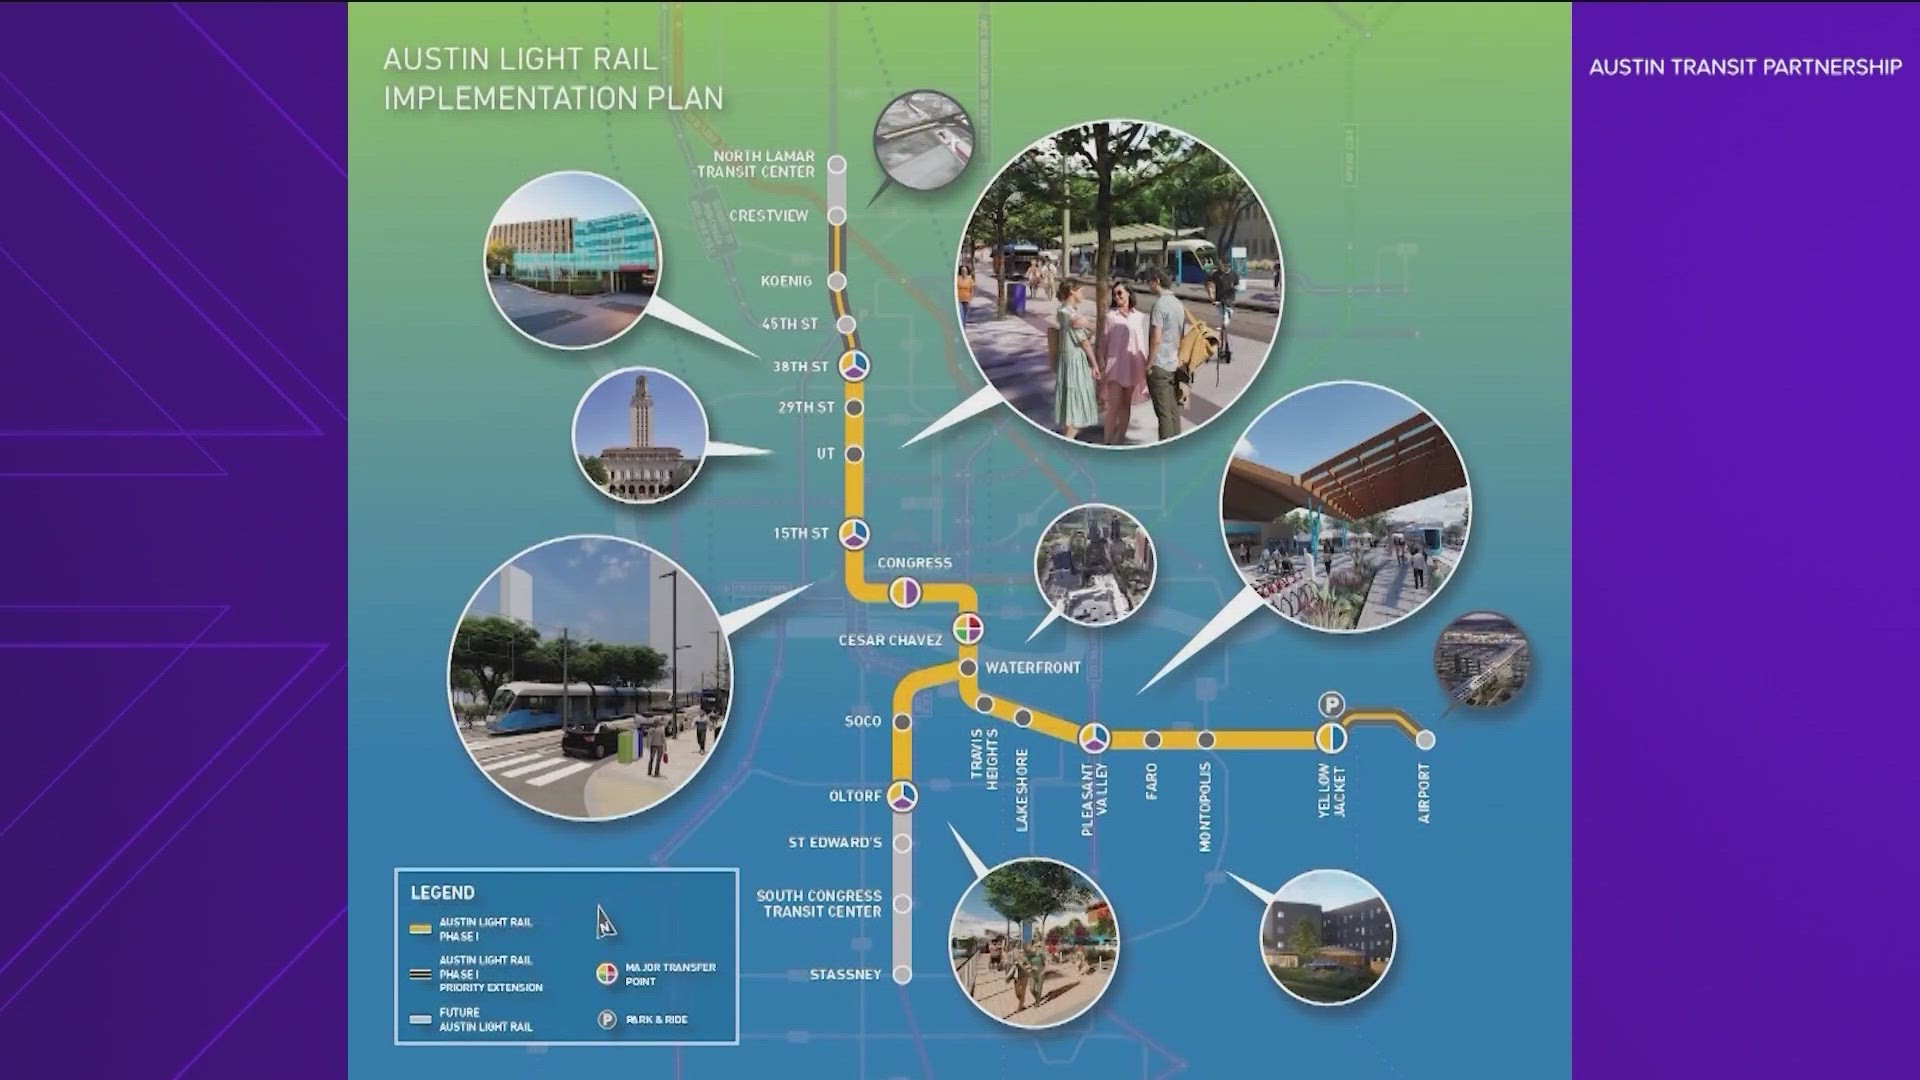 The multi-billion dollar project would add nearly 10 new miles of light rail and 15 new stations throughout the city.